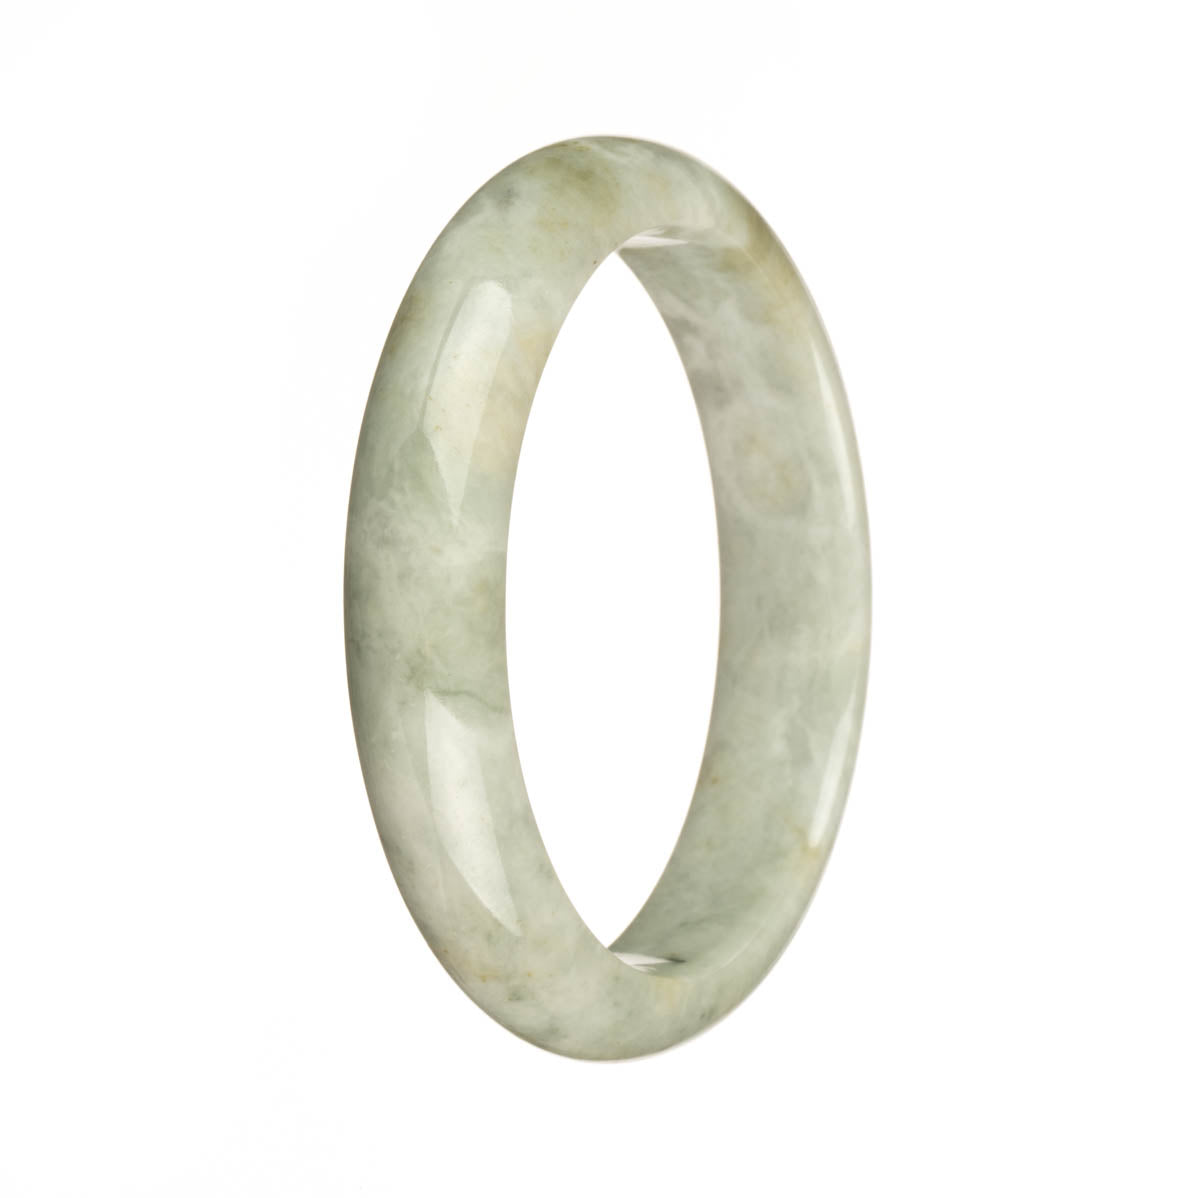 A close-up image of a genuine untreated grey Burma Jade bangle with a dark grey pattern. The bangle is in the shape of a half moon and measures 59mm in diameter. Expertly crafted by MAYS GEMS.